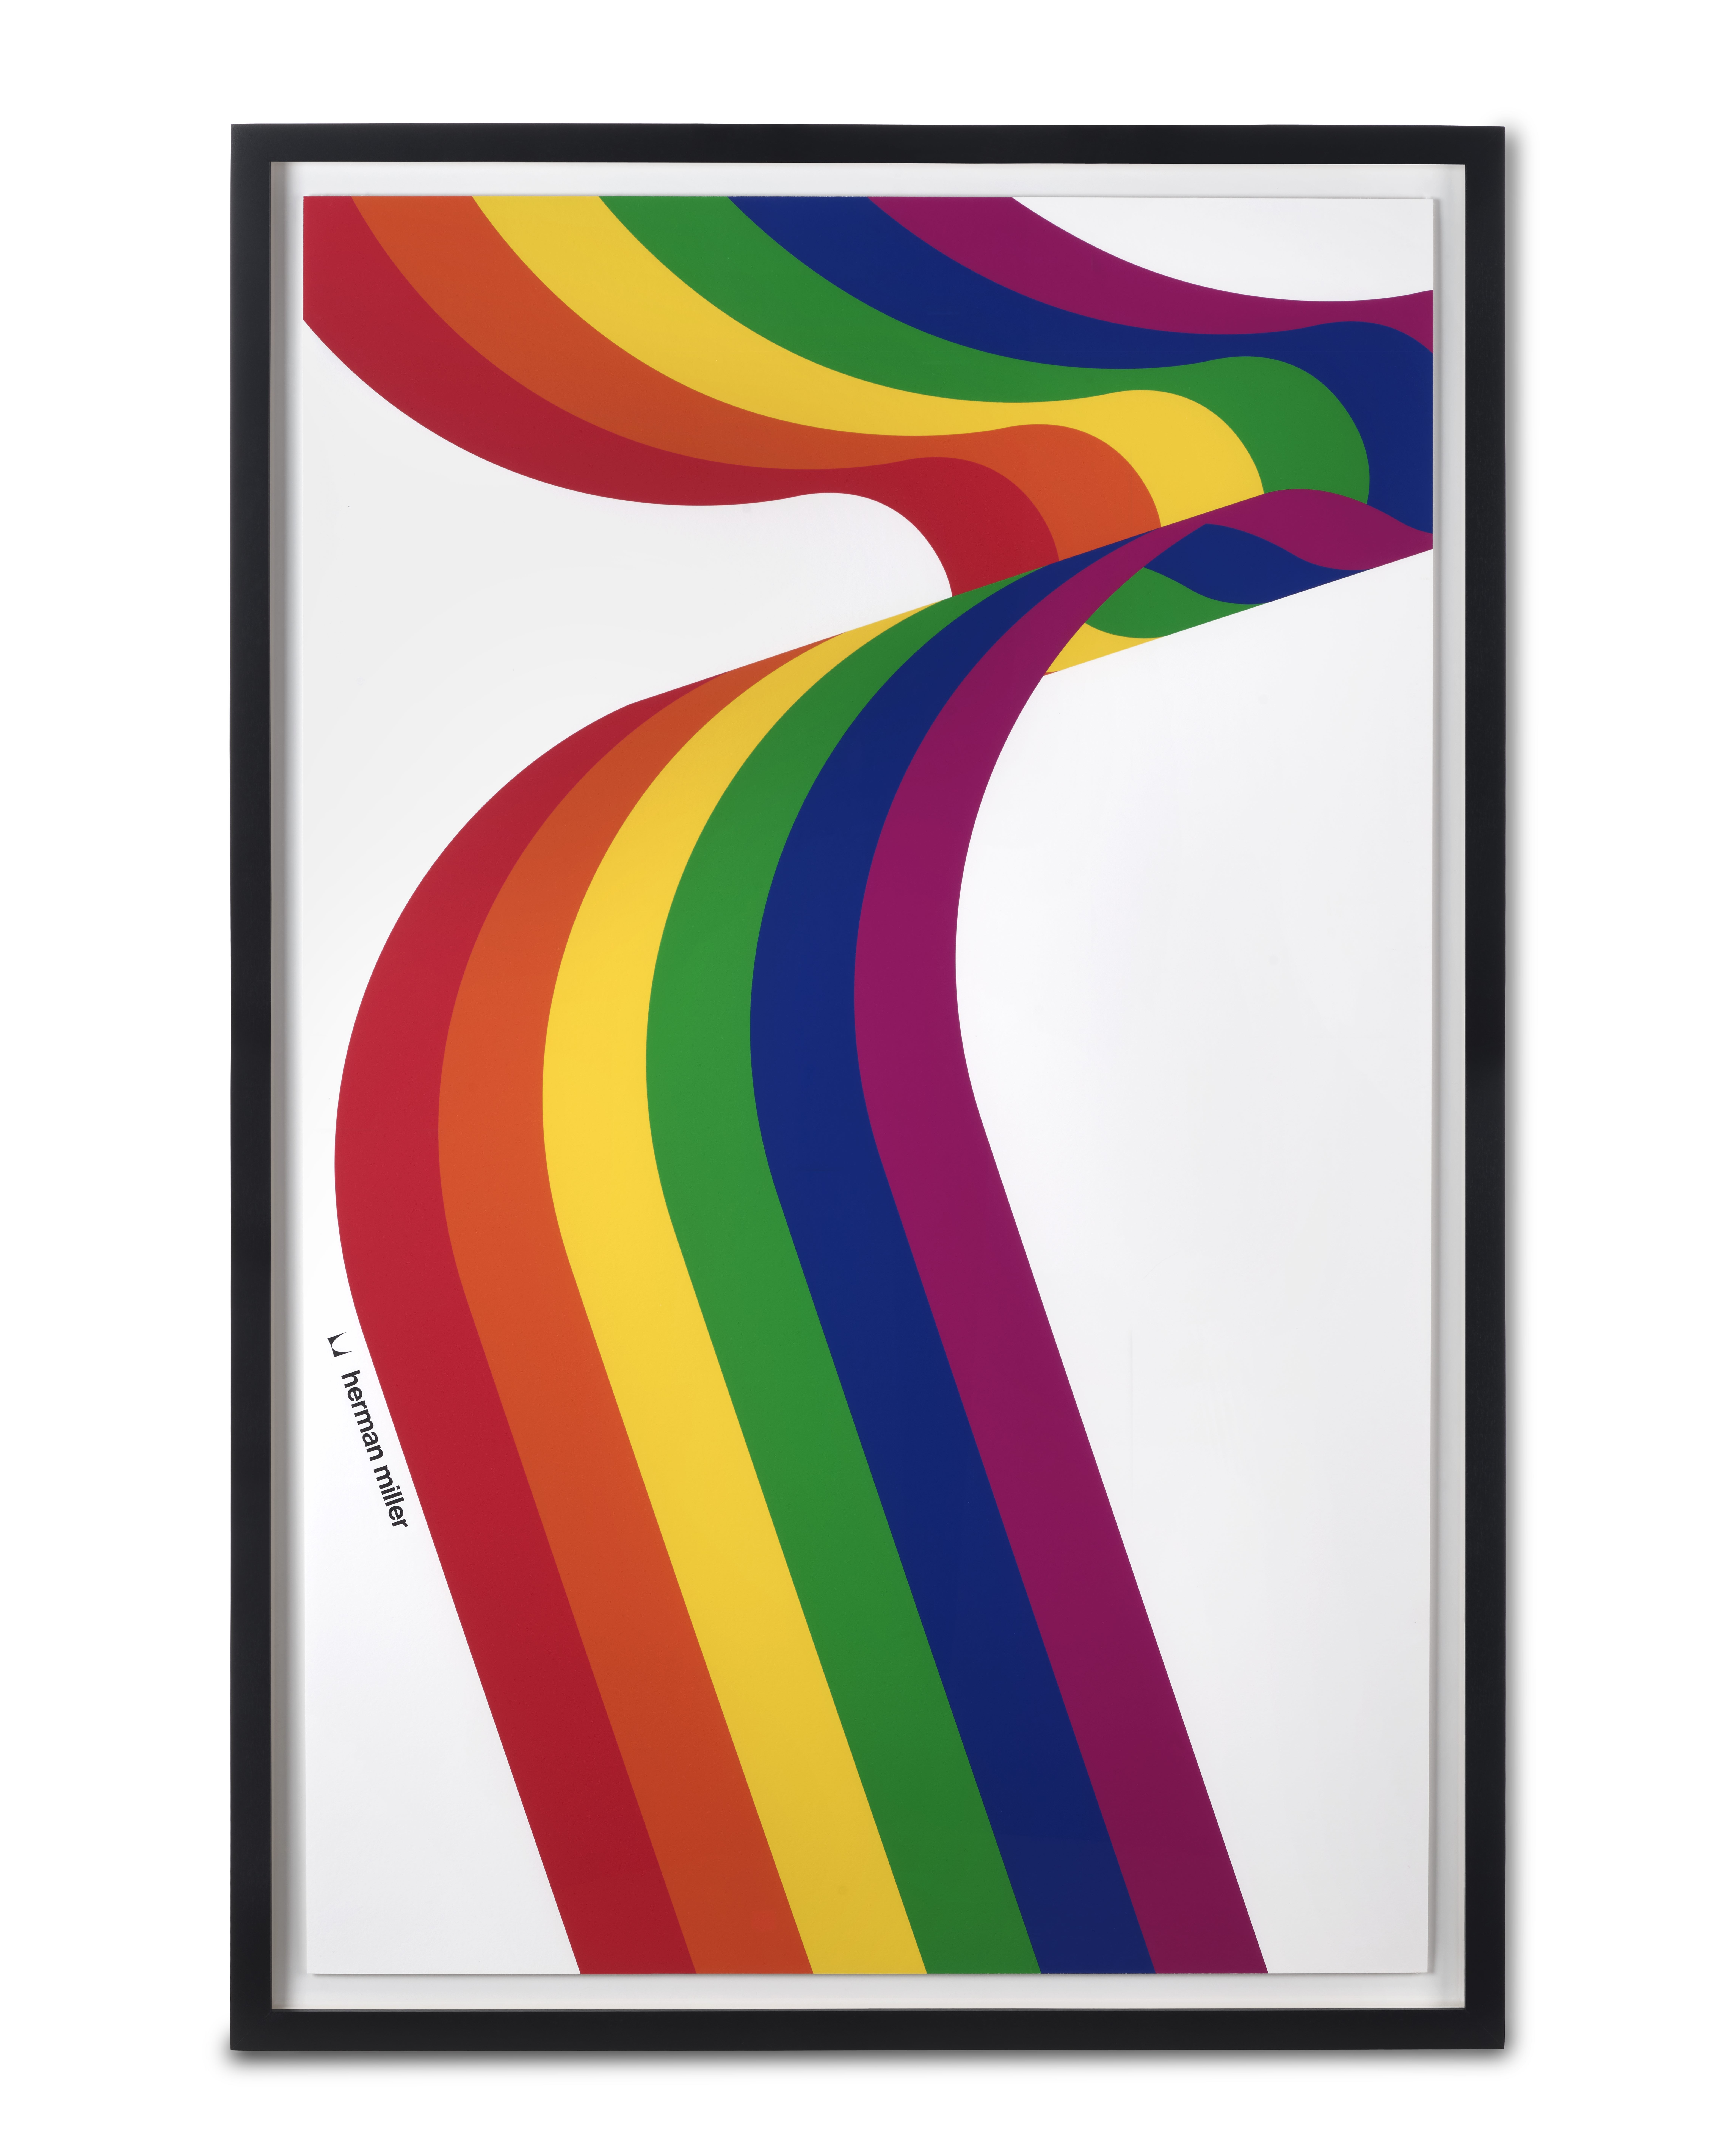 ‘Rainbow Resources’ poster designed in 1979. A downward flowing rainbow on a white background.